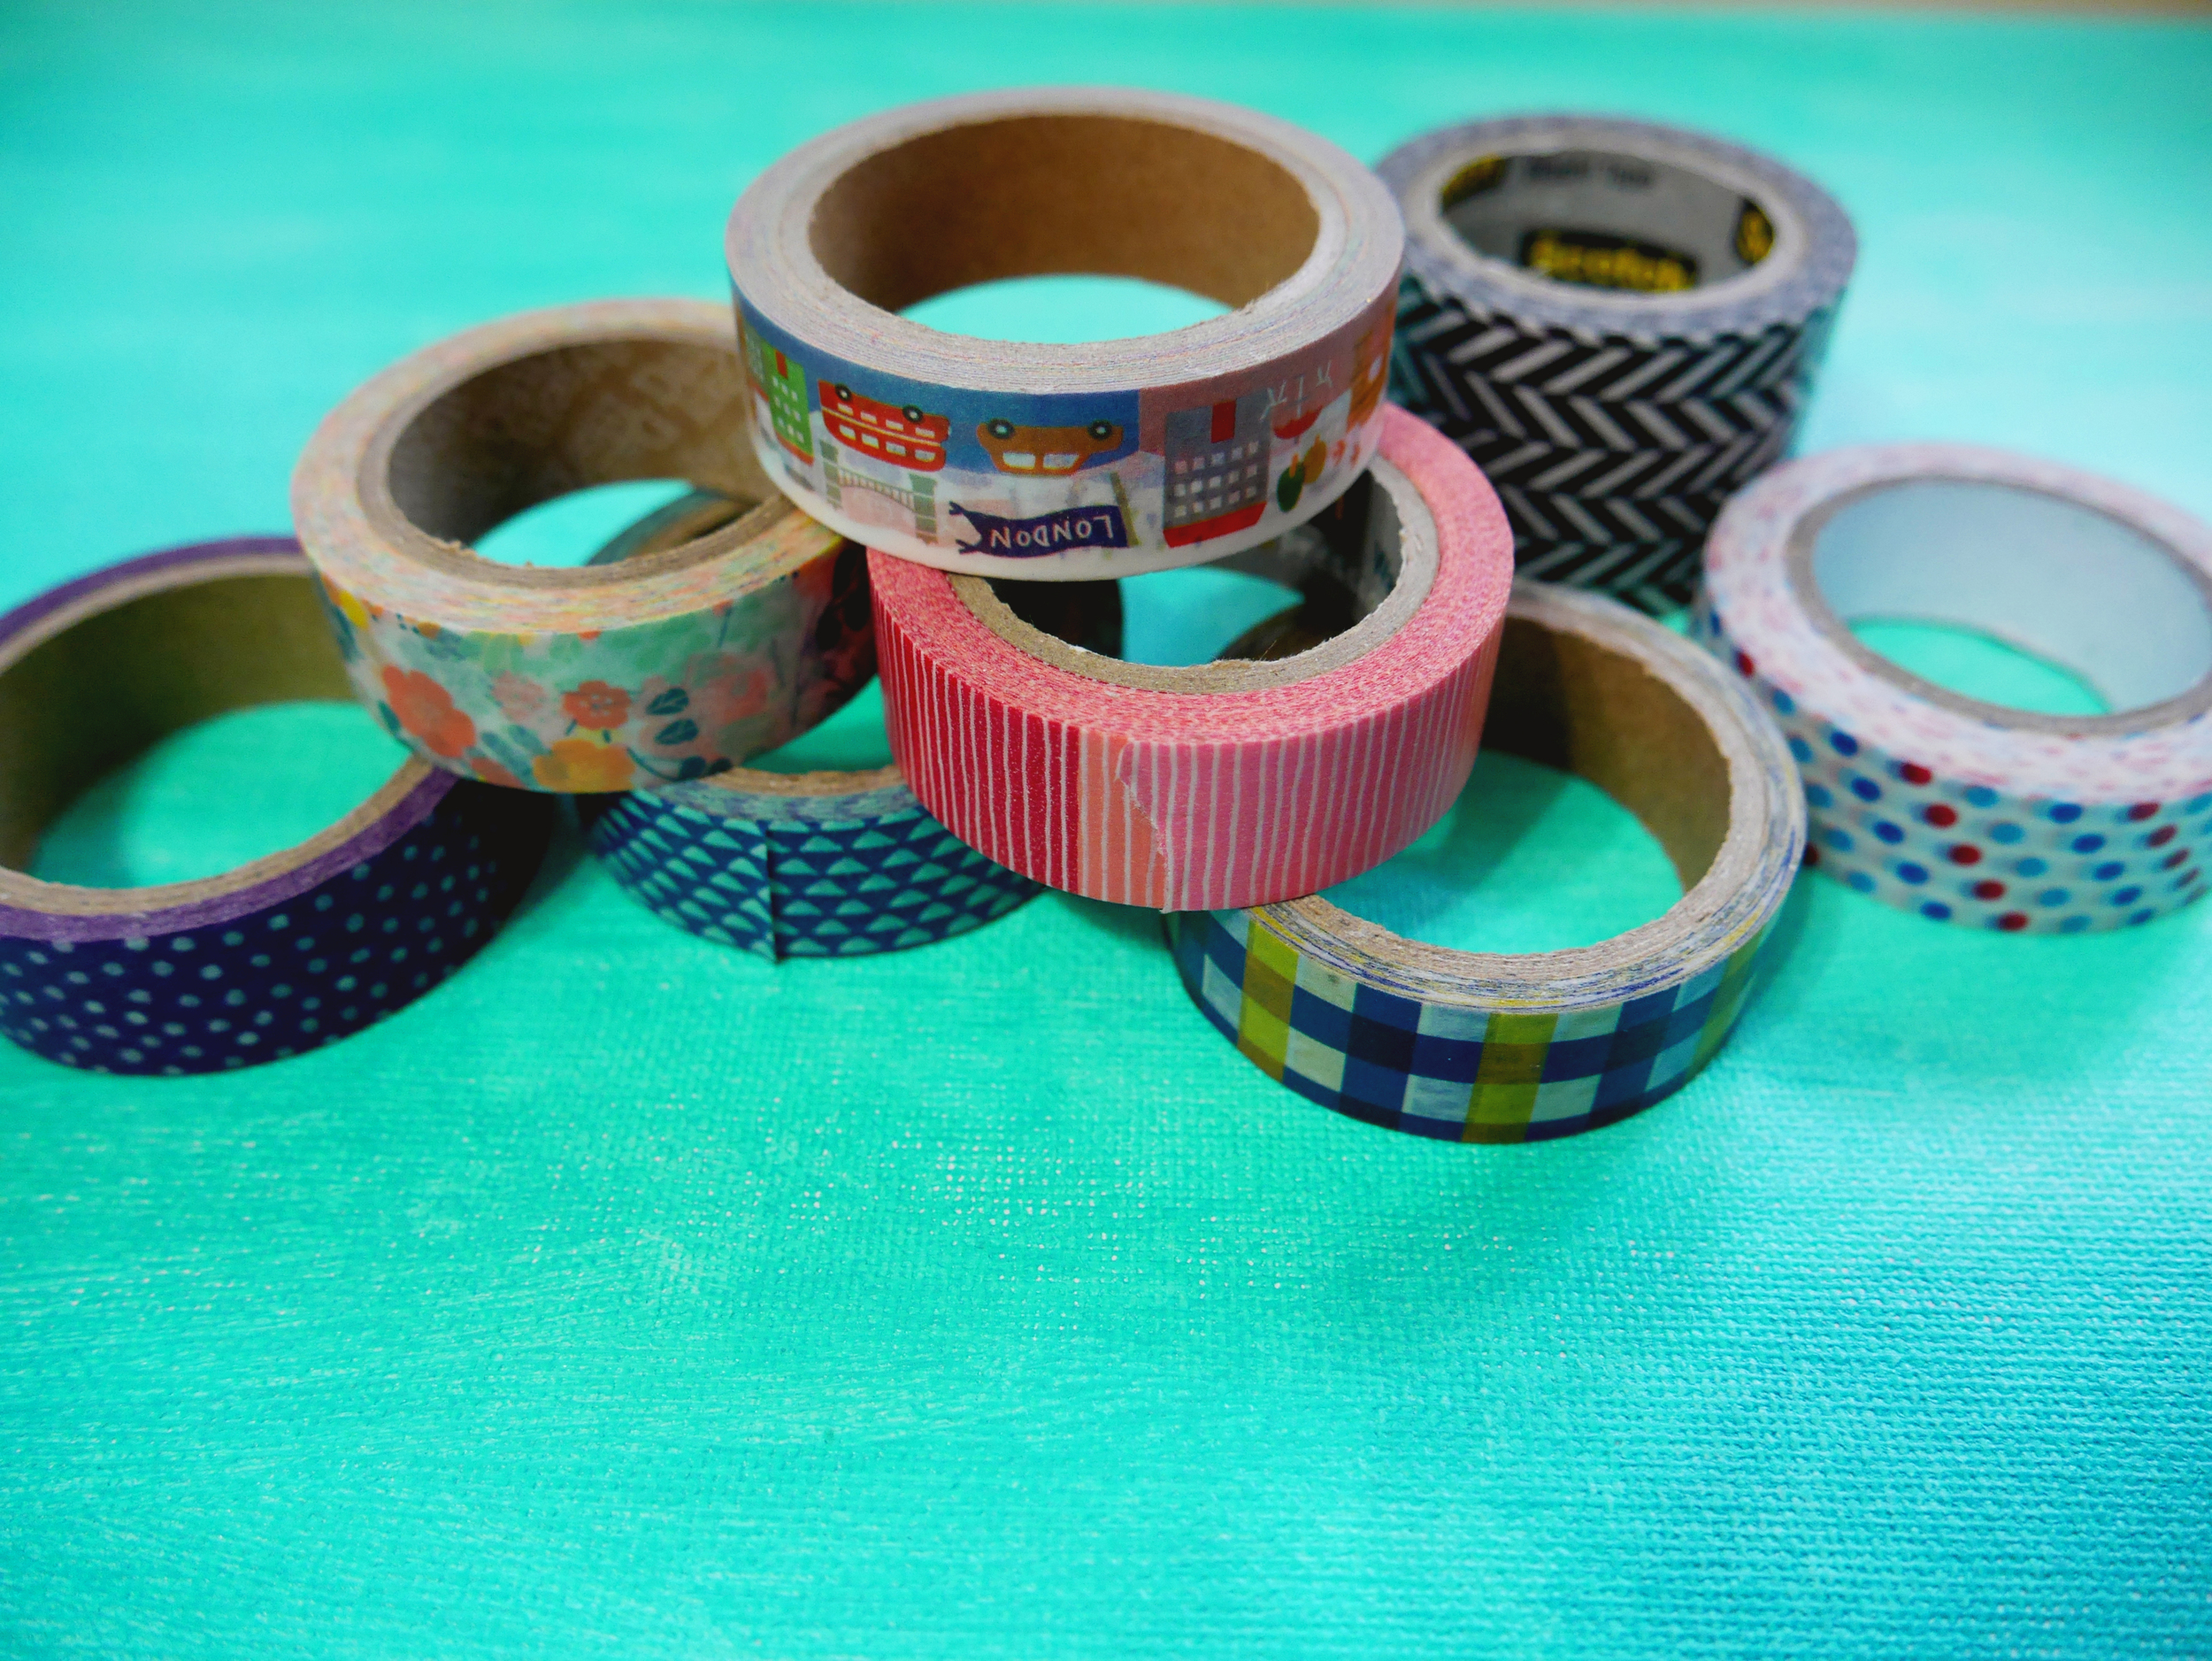 Easy Crafting with Washi Tape — Bee Sweet Studio